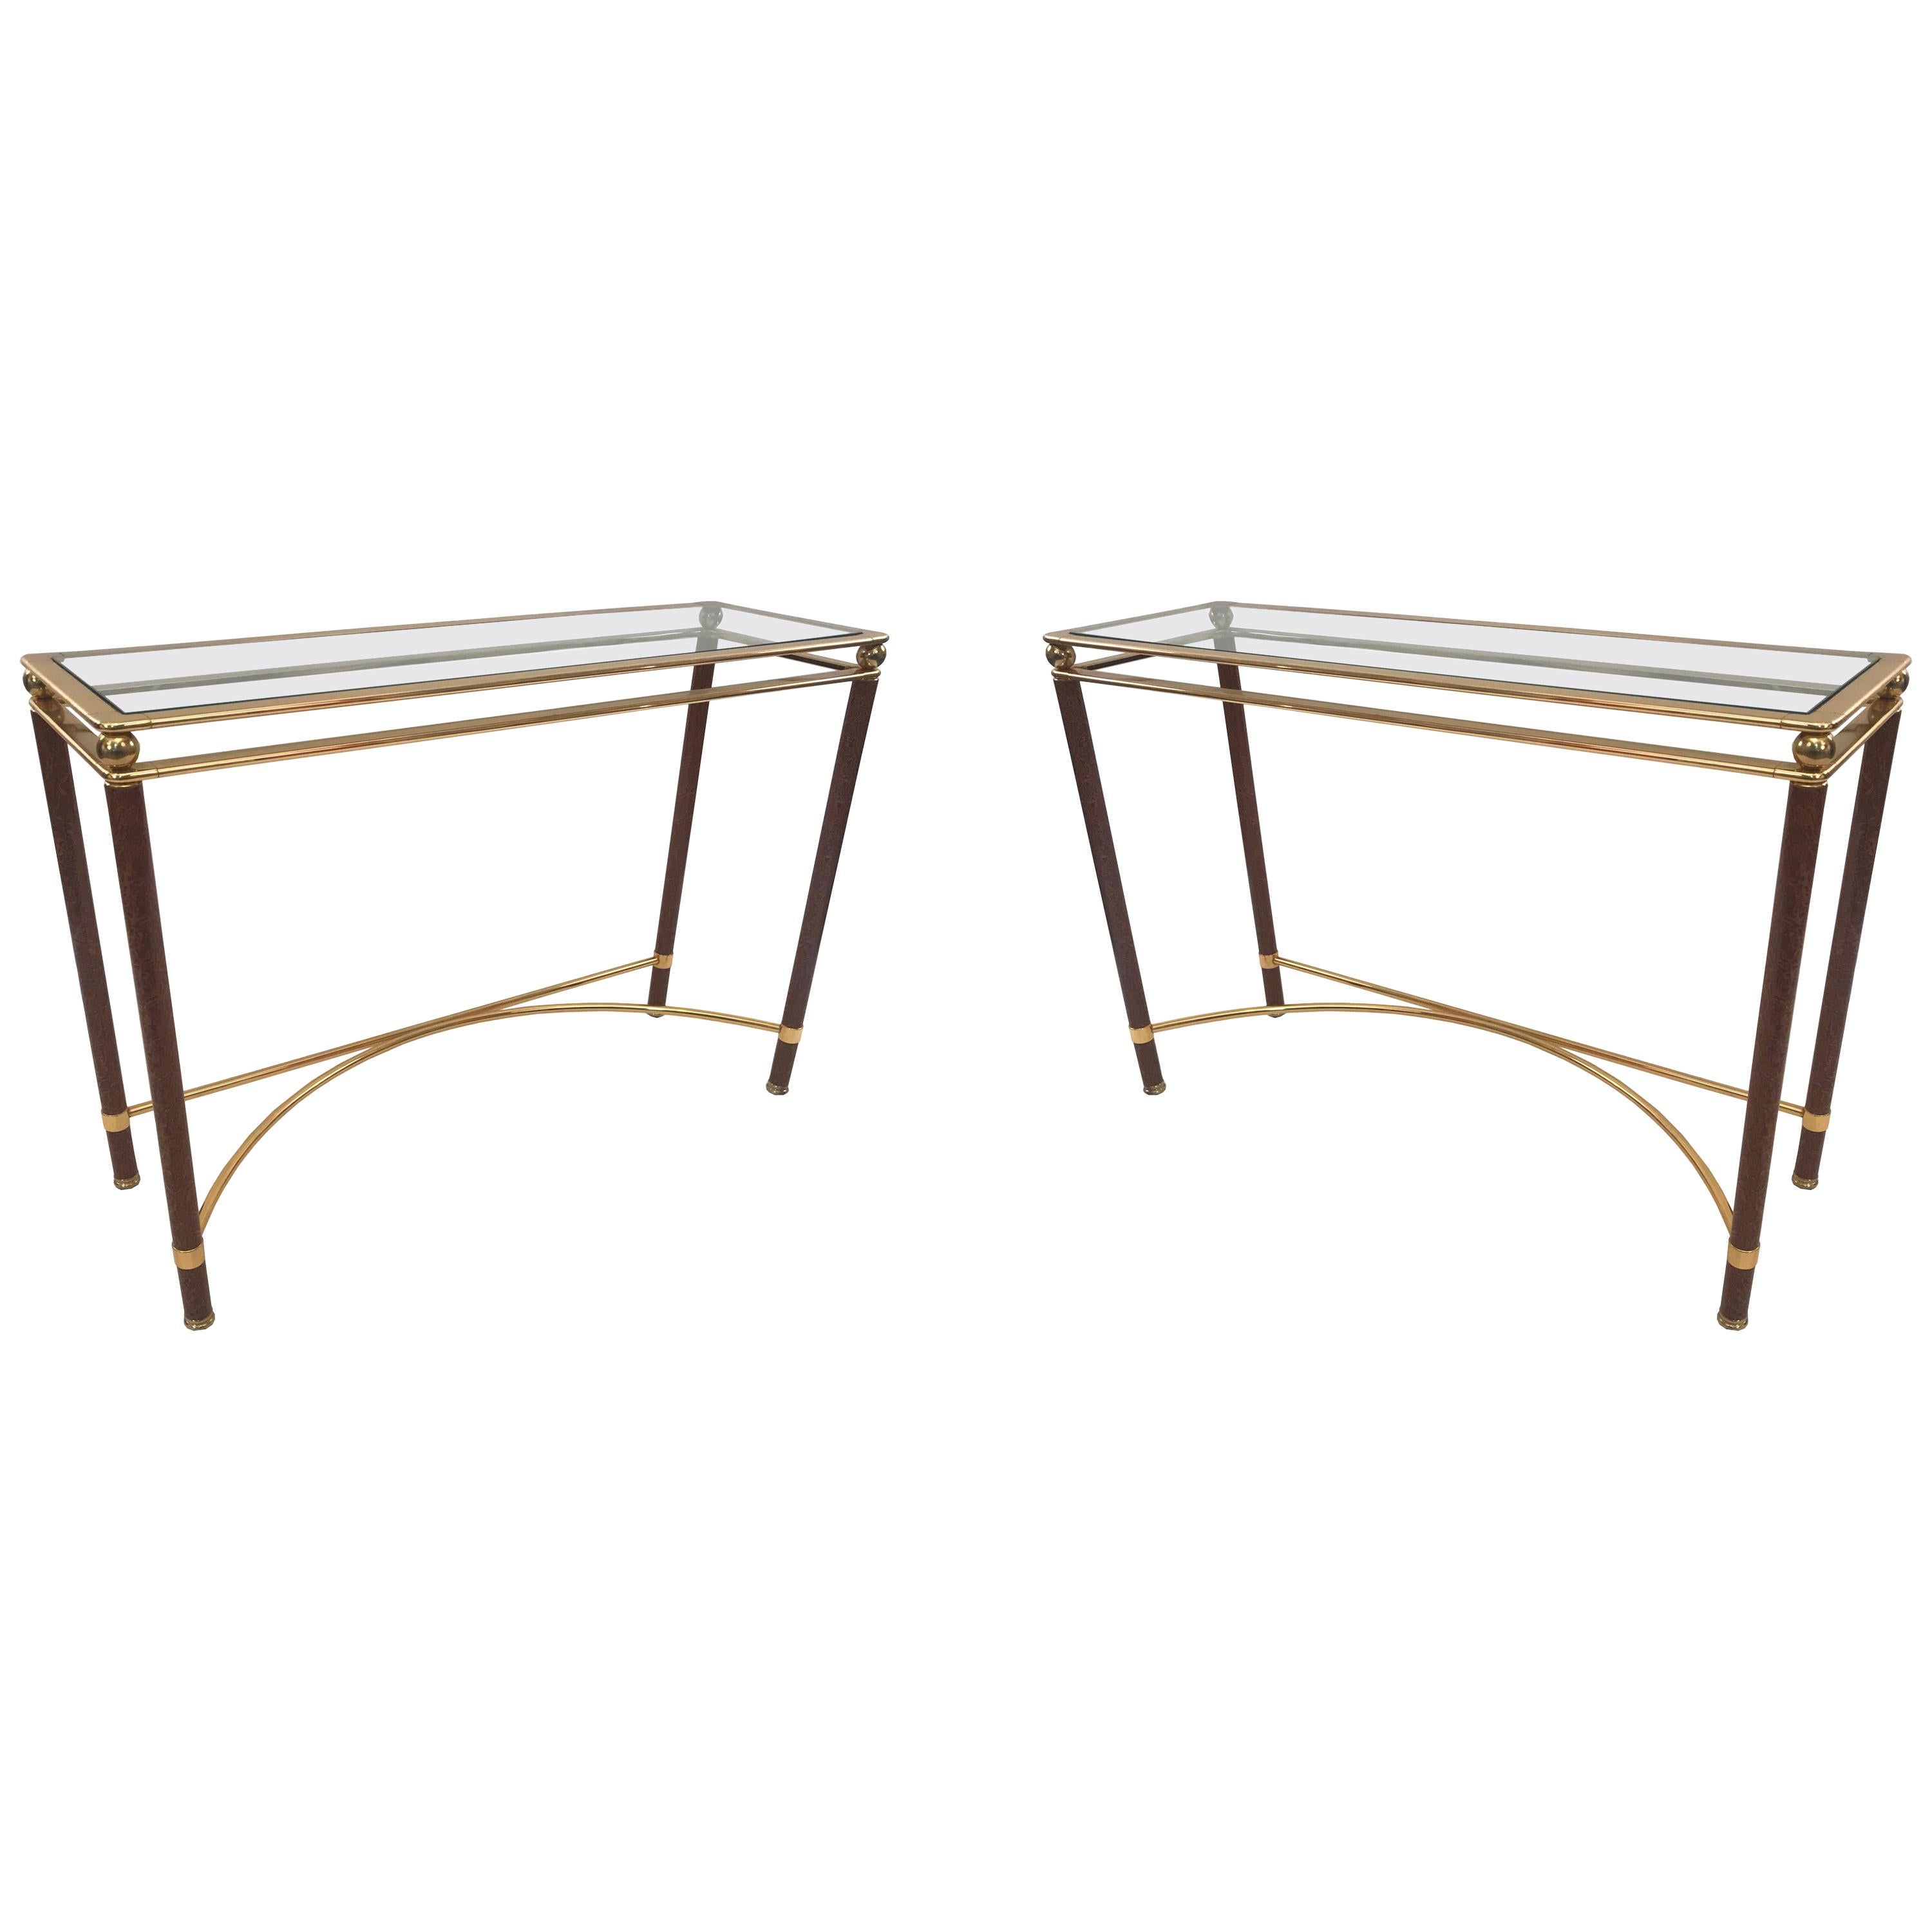 Pair of Midcentury Console Tables